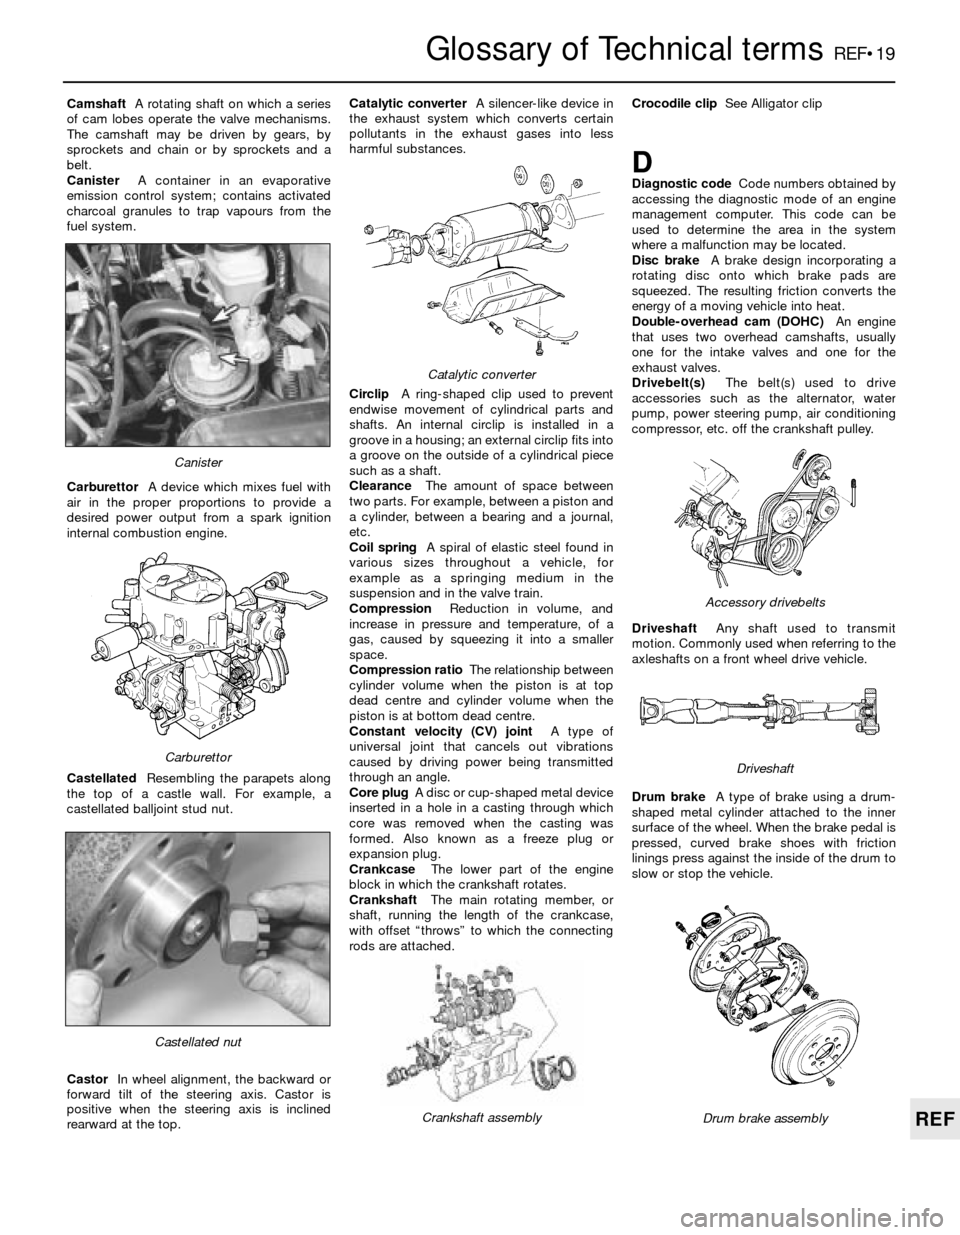 FORD SIERRA 1985 1.G Reference Workshop Manual Glossary of Technical termsREF•19
REF
CamshaftA rotating shaft on which a series
of cam lobes operate the valve mechanisms.
The camshaft may be driven by gears, by
sprockets and chain or by sprocket